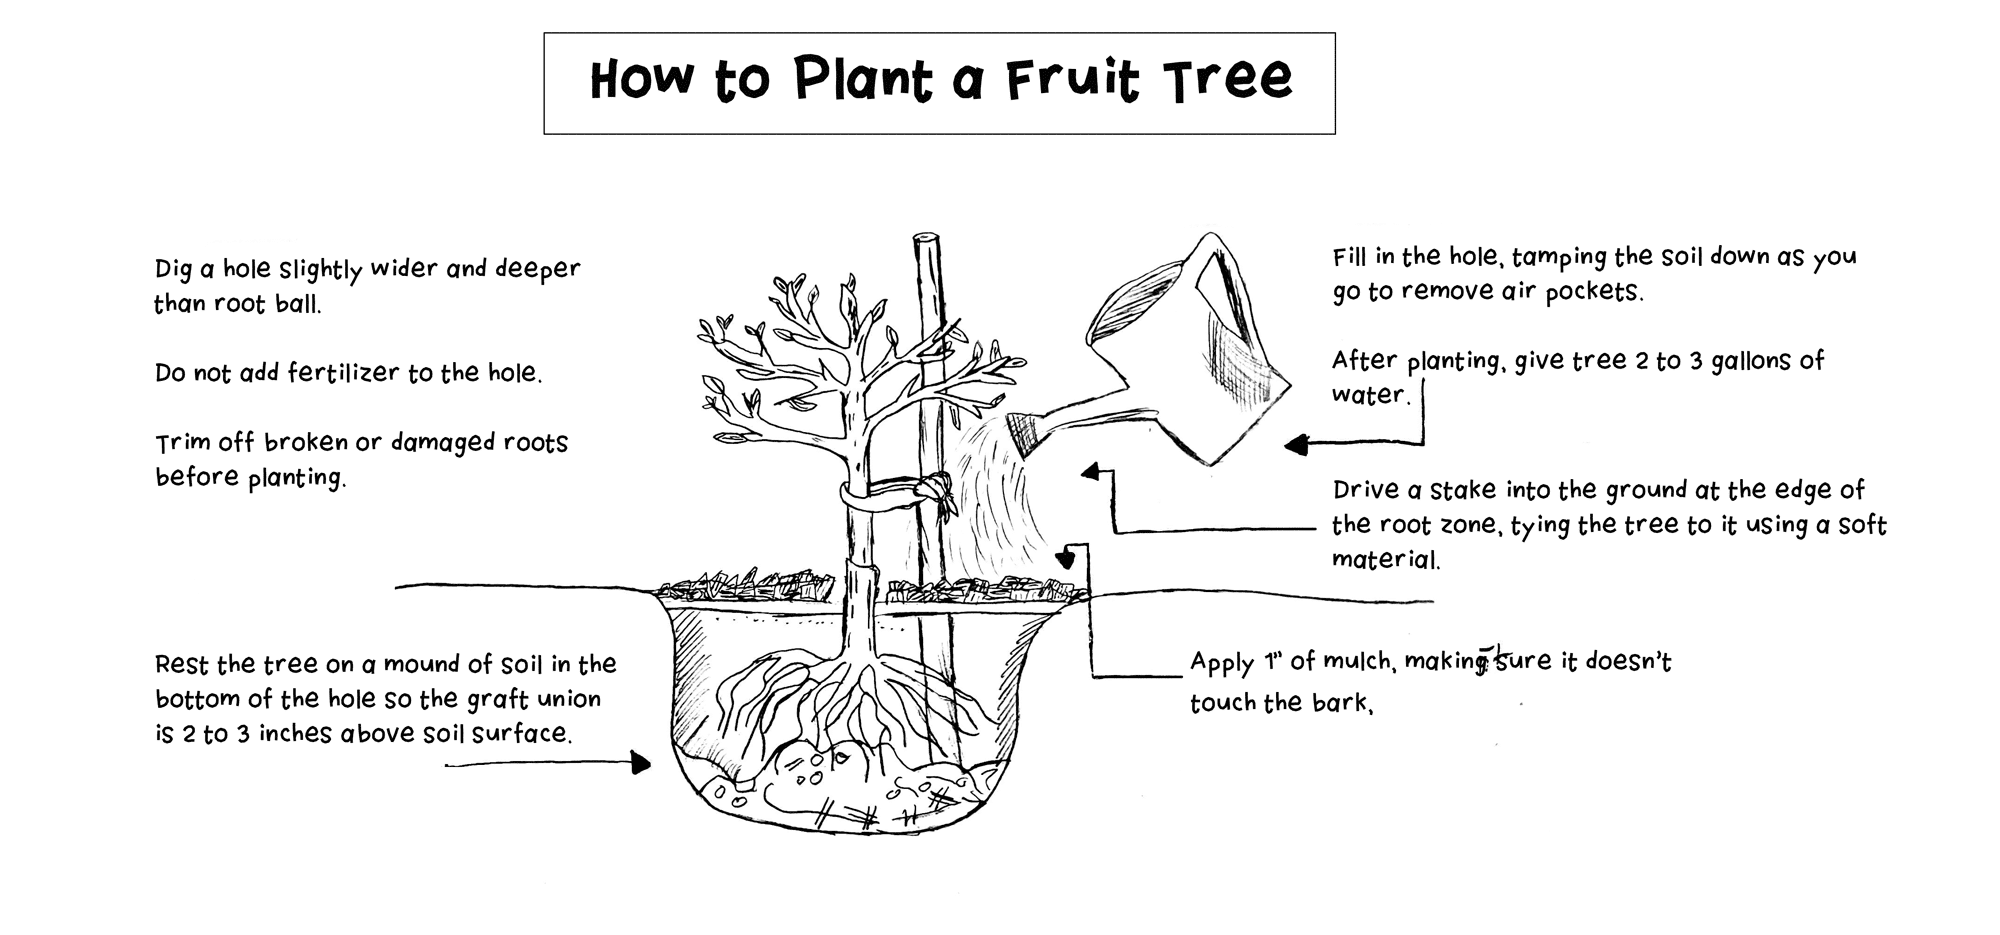 How to plant a tree: illustrated guide